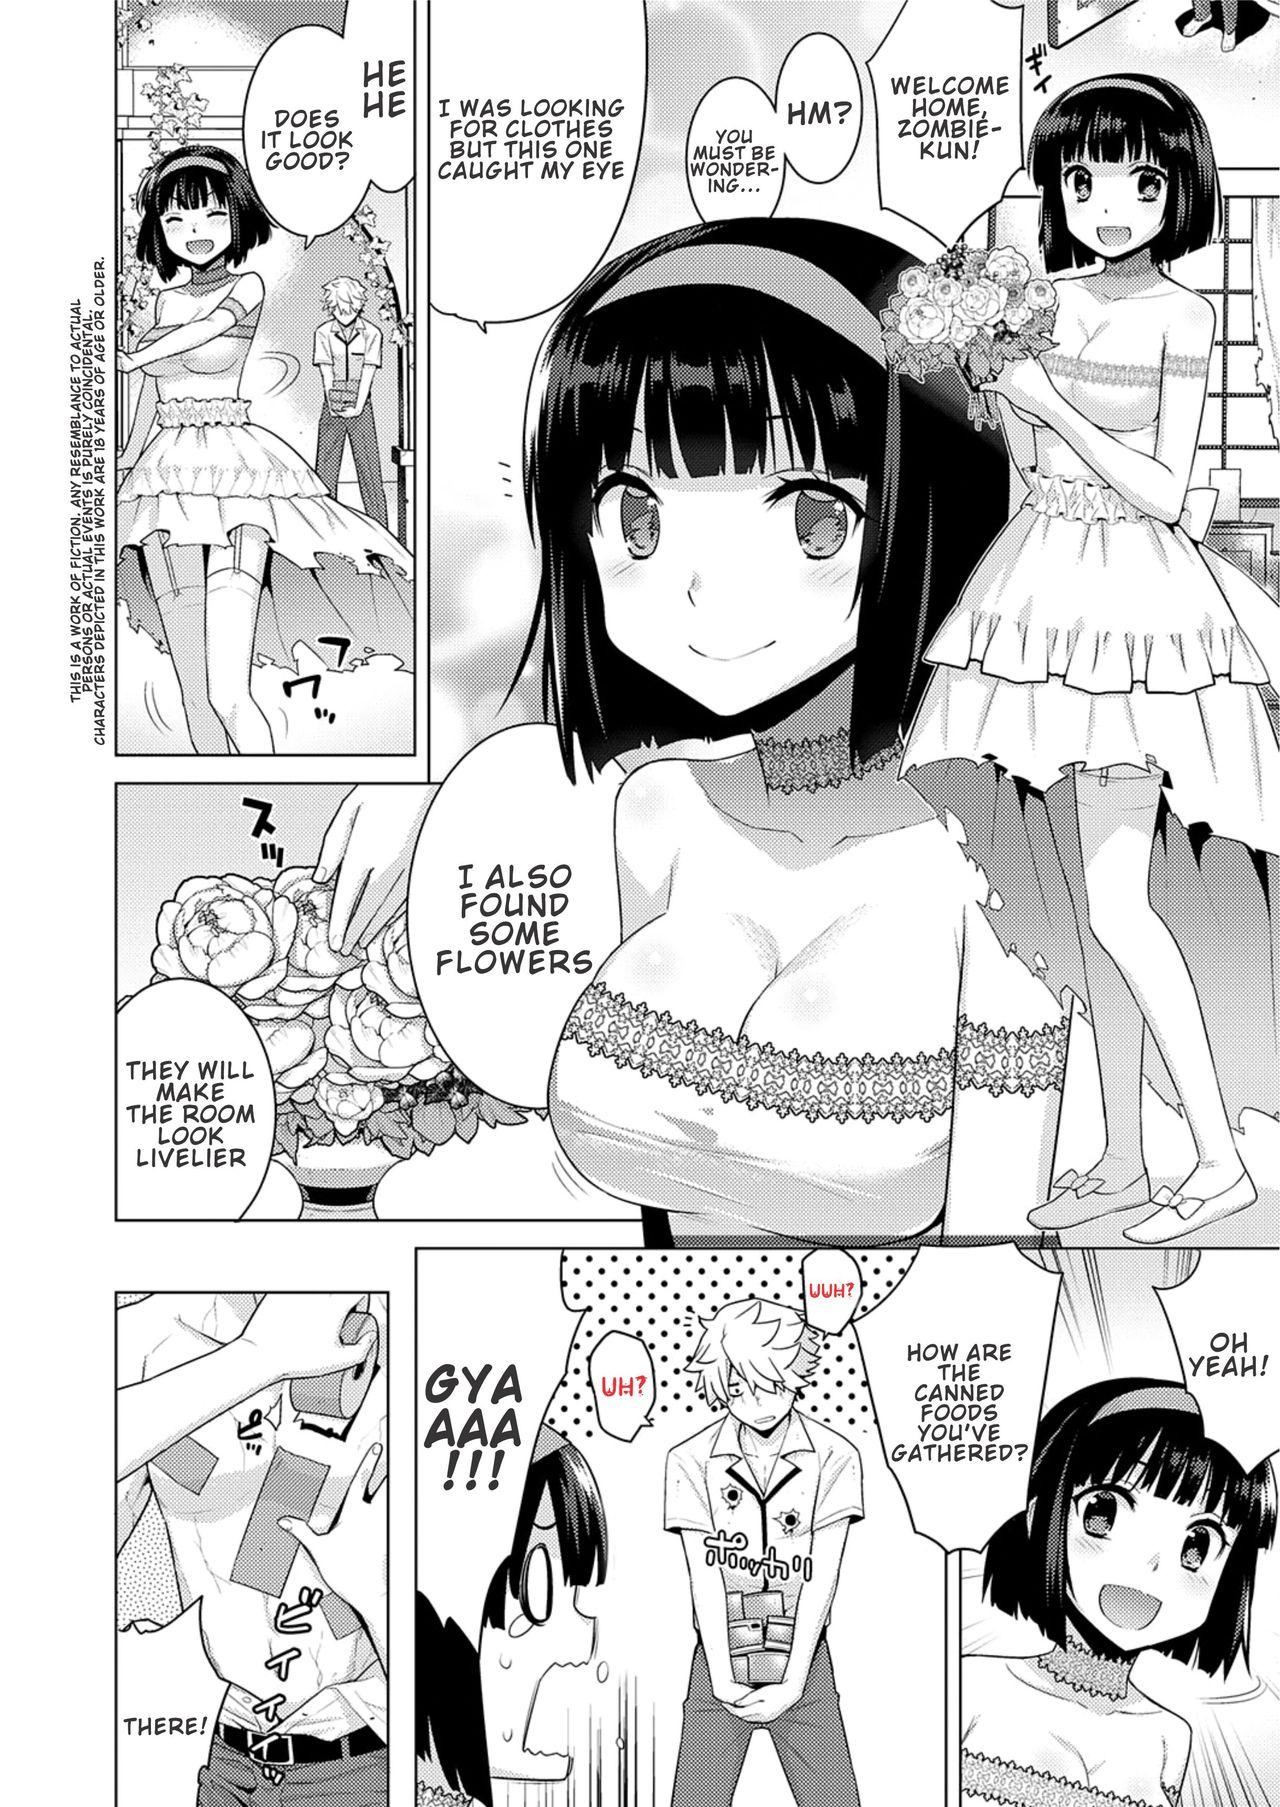 Point Of View Zombie no Hanayome | The Bride of Zombie Red Head - Page 2